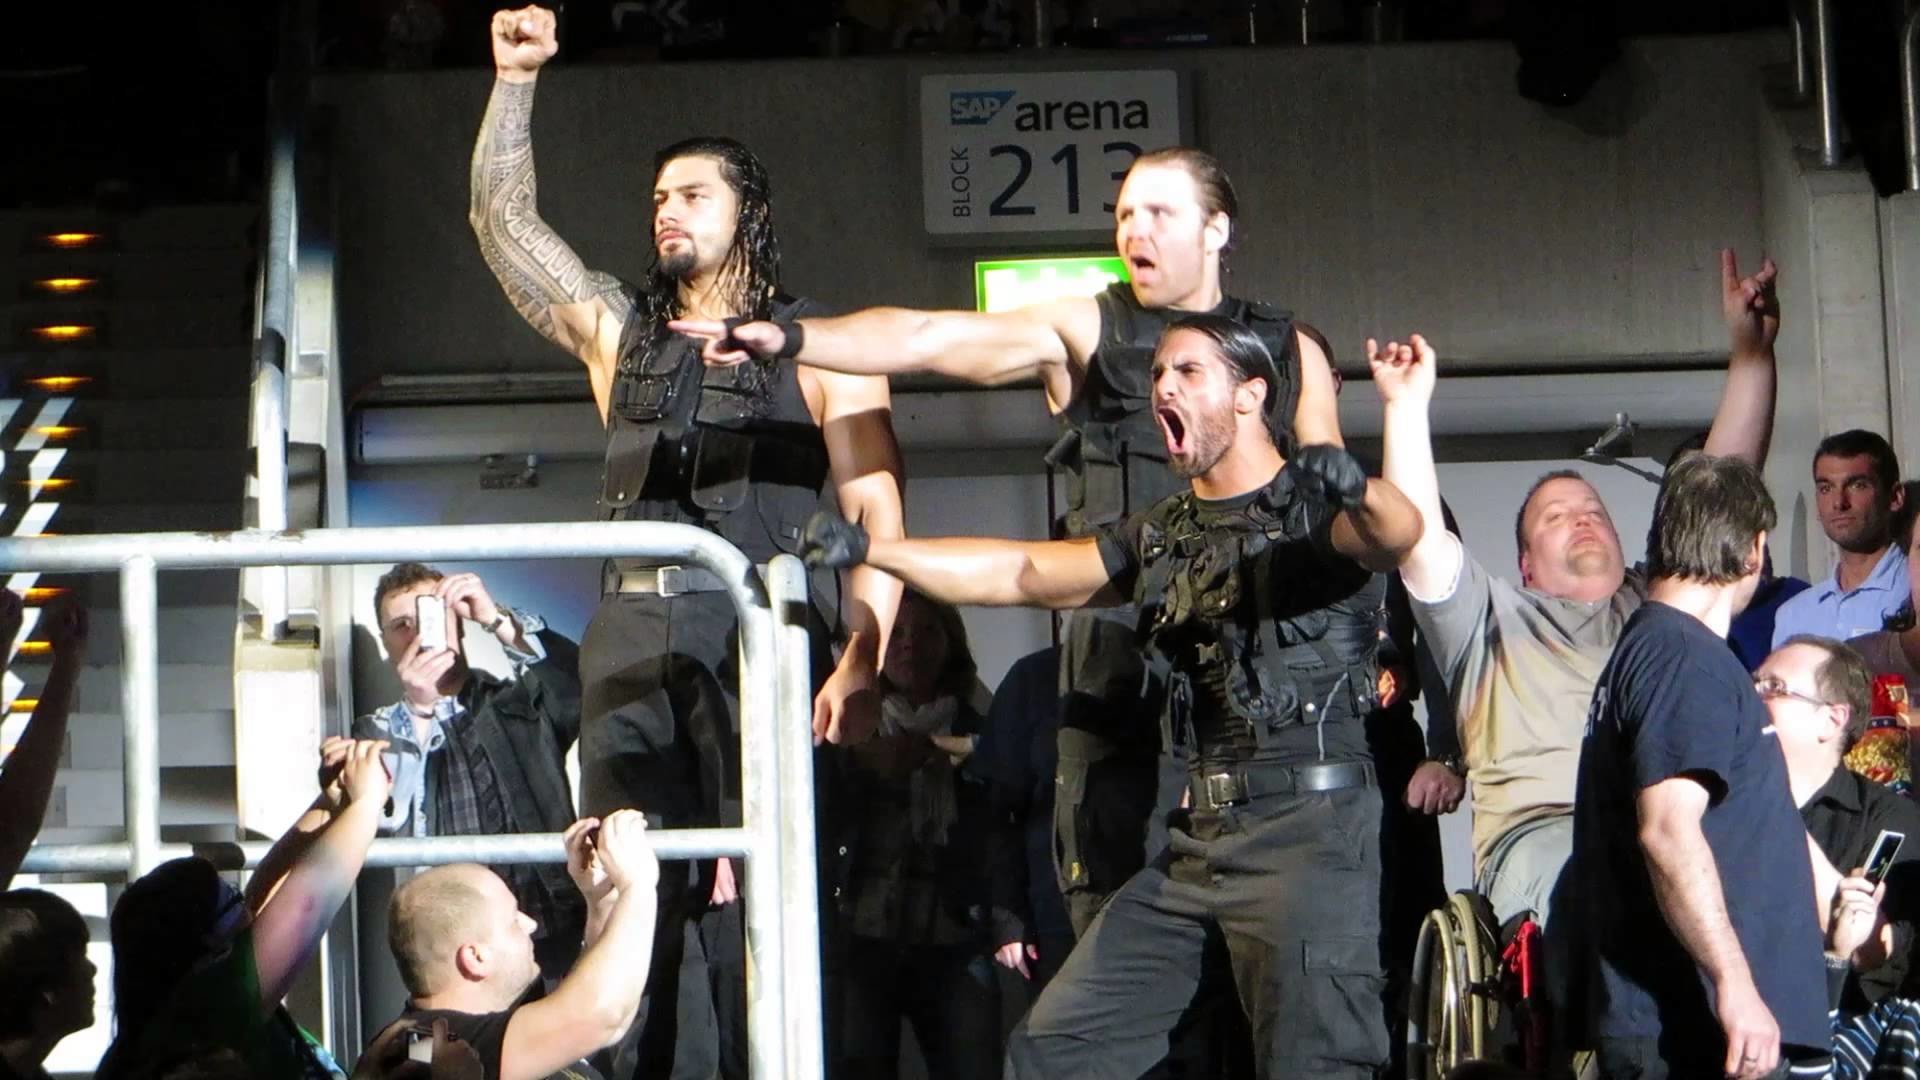 1920x1080 The Shield Entrance at the Wrestlemania Revenge Tour in Mannheim 2013 -  YouTube